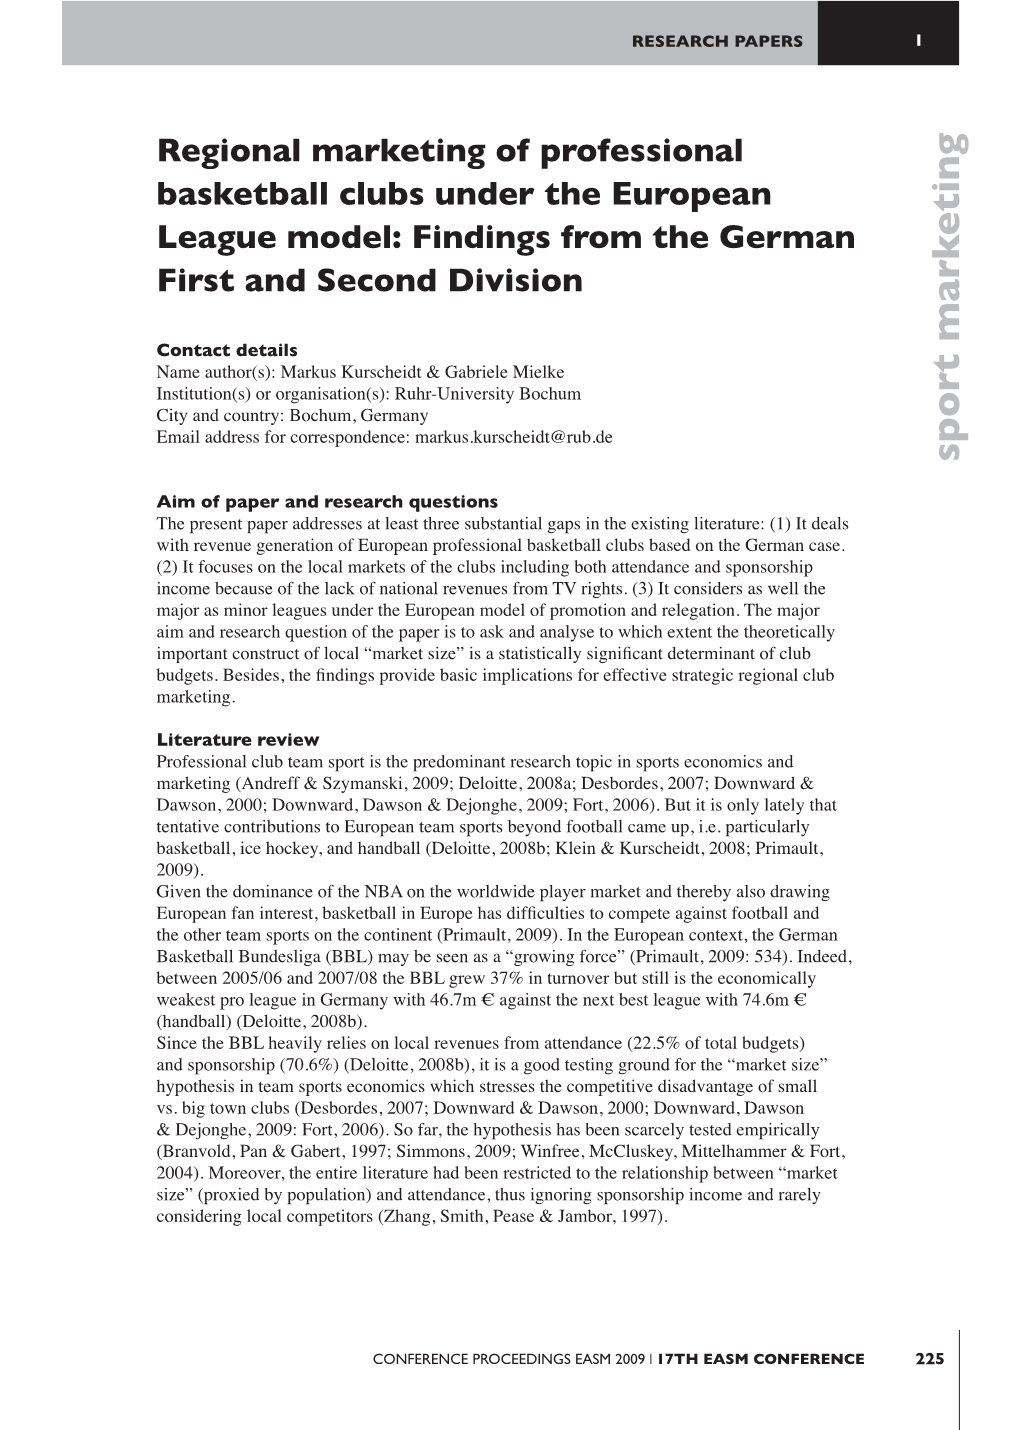 Regional Marketing of Professional Basketball Clubs Under the European League Model: Findings from the German First and Second Division